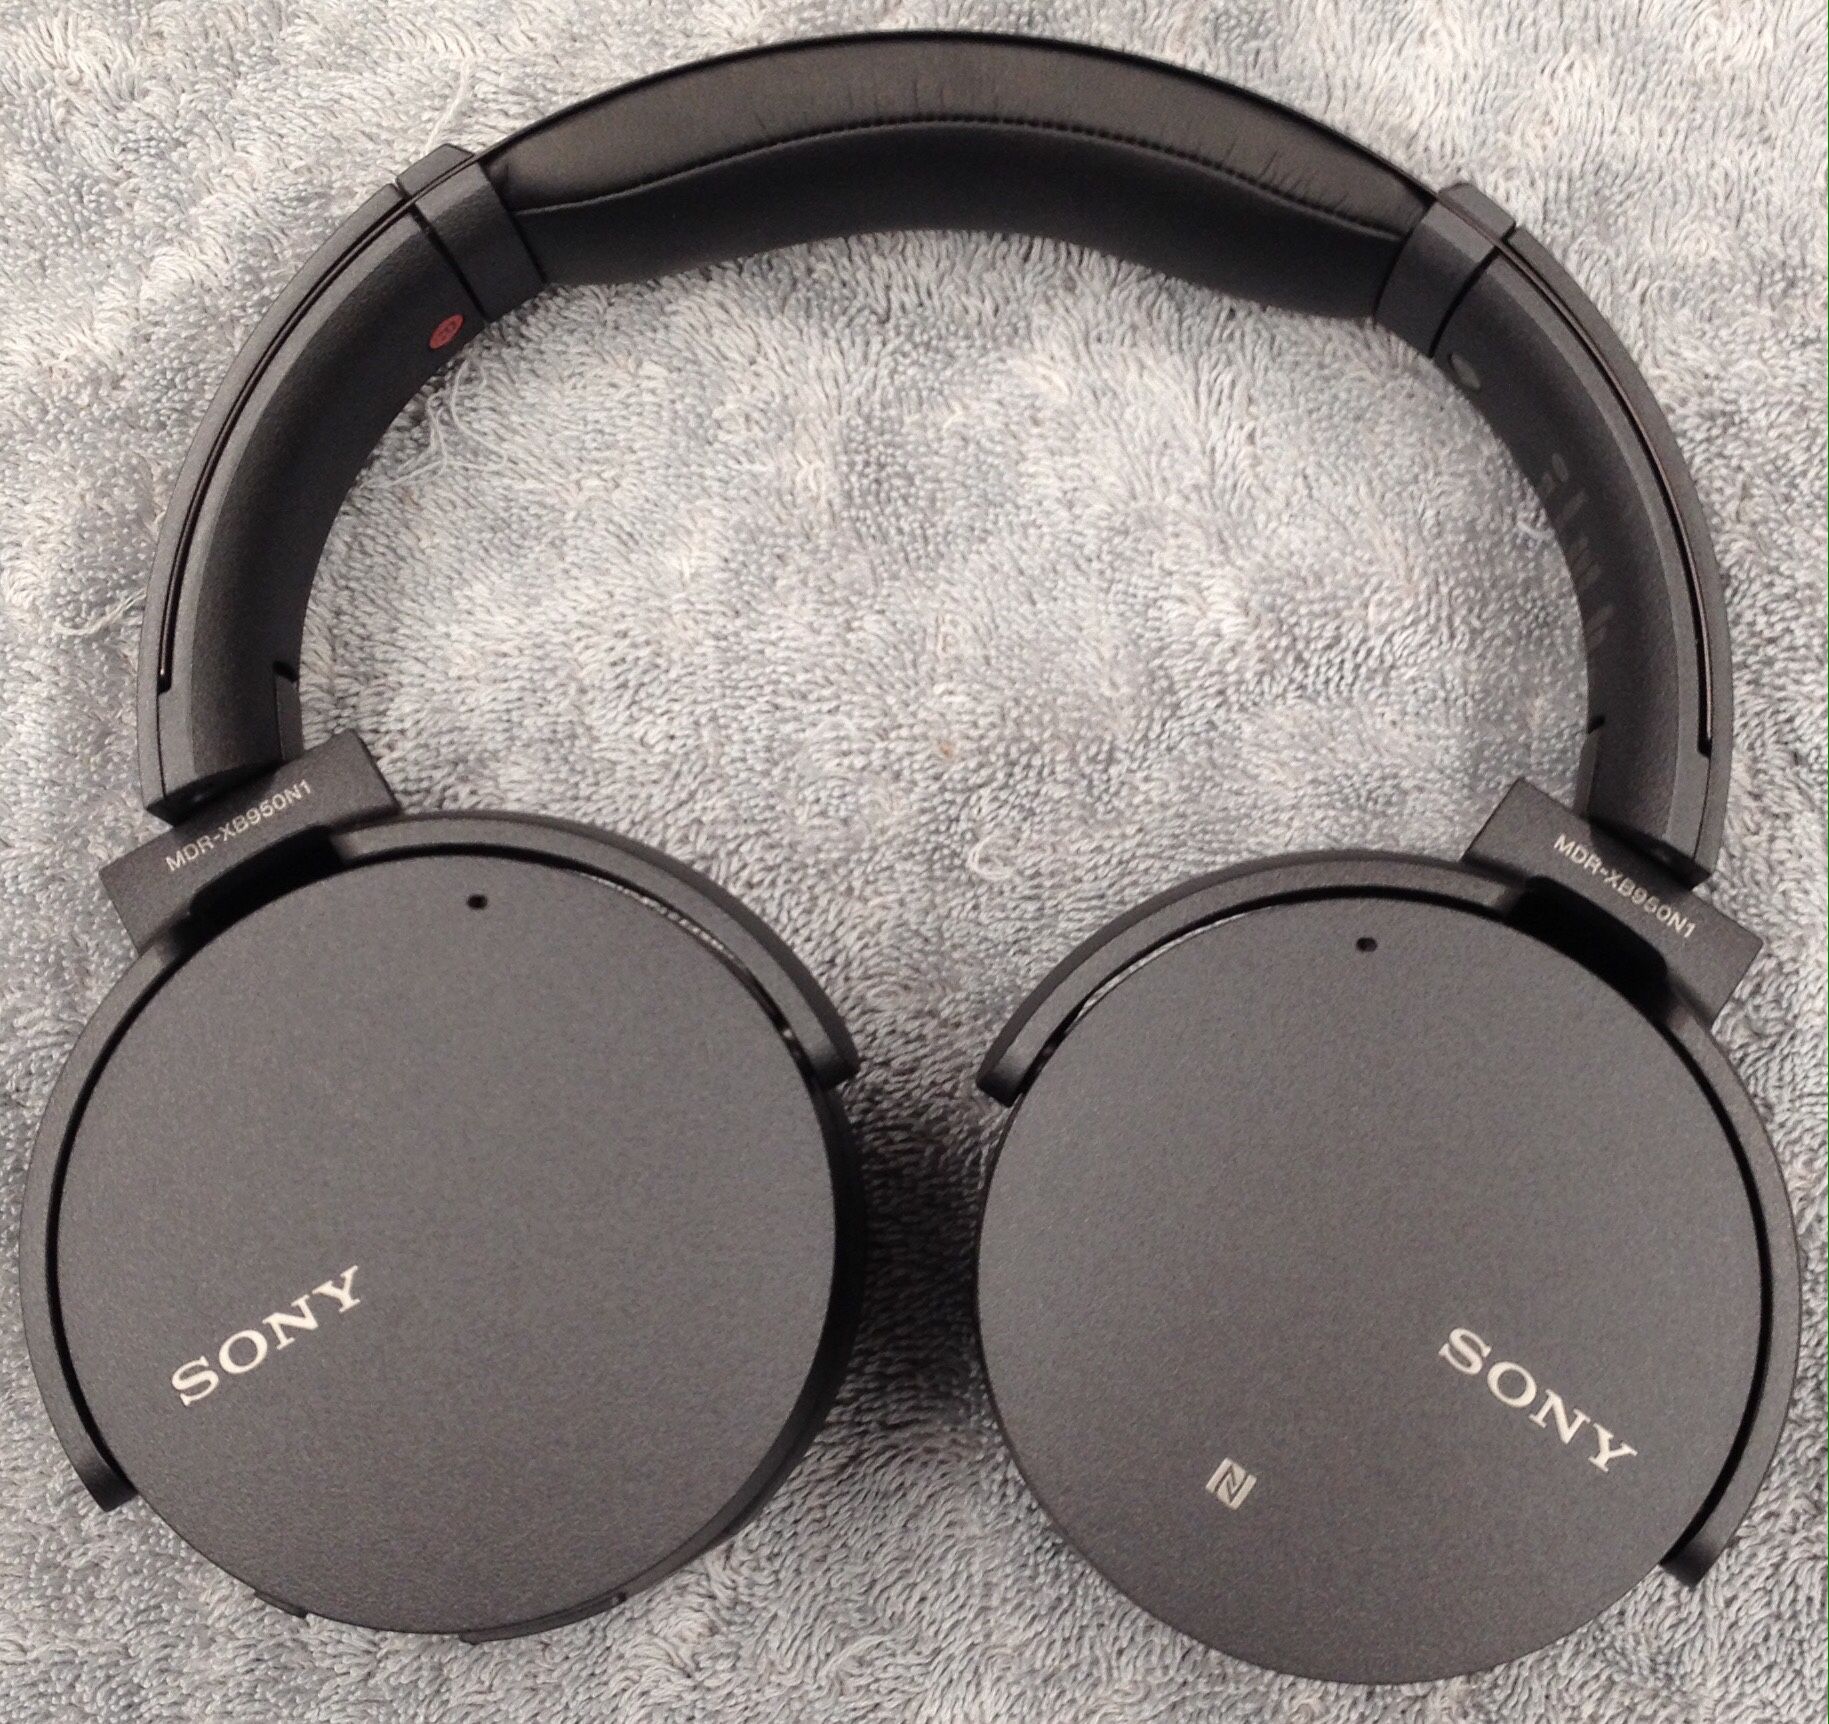 Sony MDR-950 Bluetooth Noise Cancelling Headphones